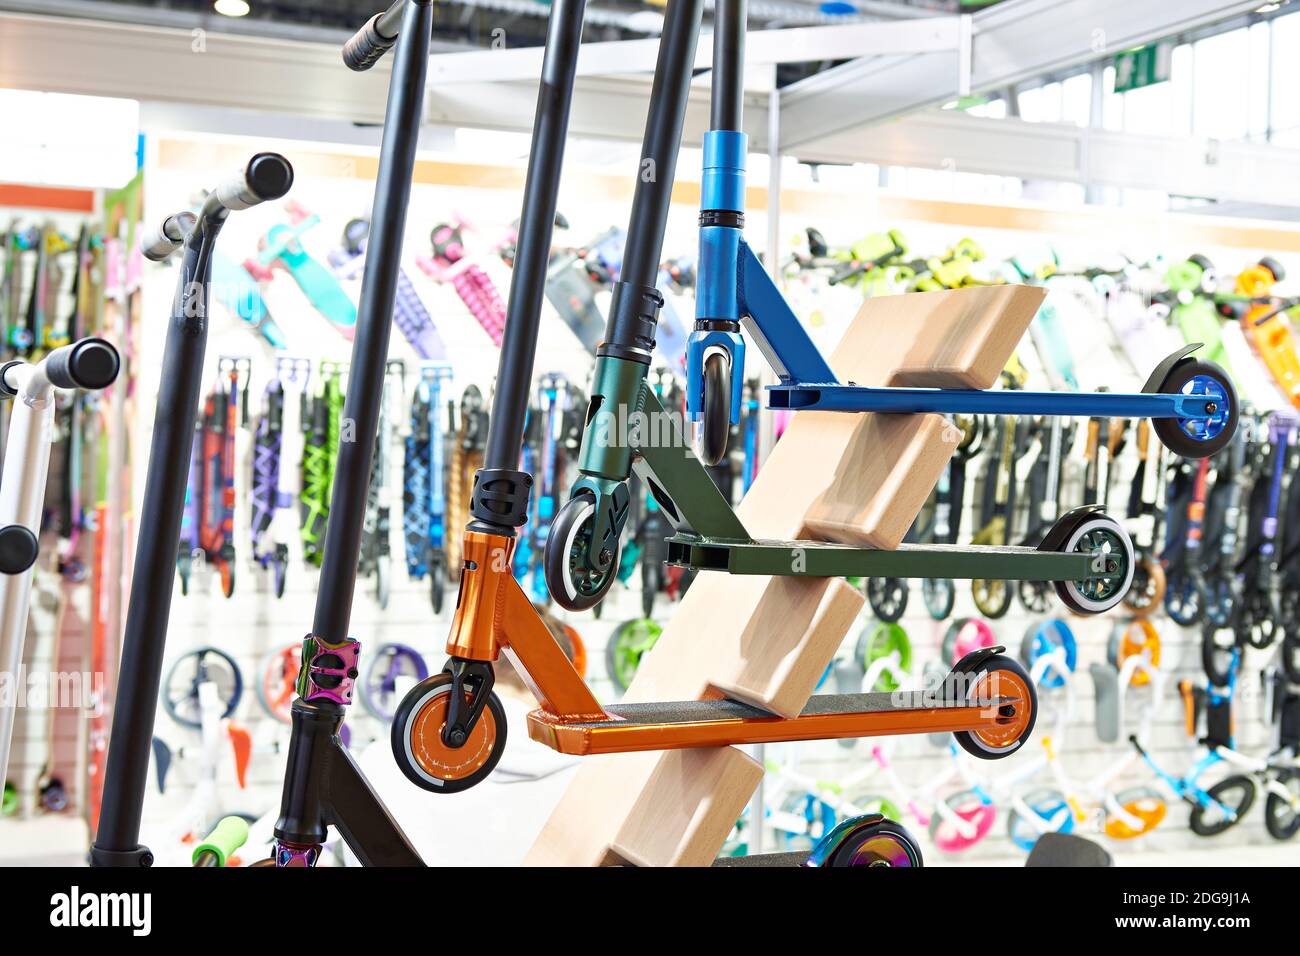 Scooters on showcase in the store Stock Photo